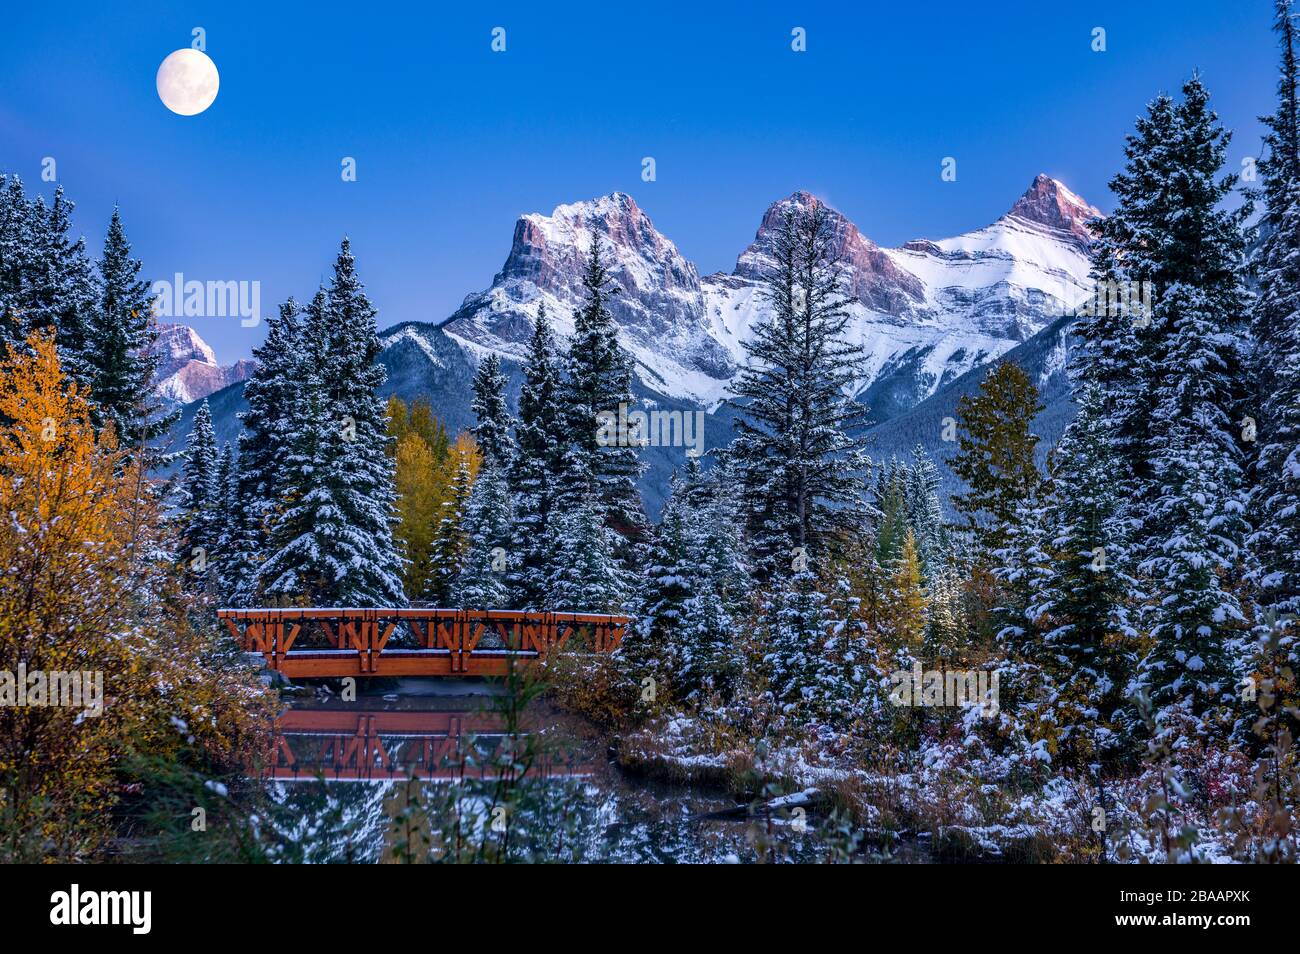 View of Spring Creek Bridge at Three Sisters Mountain, Canmore, Alberta, Canada Stock Photo